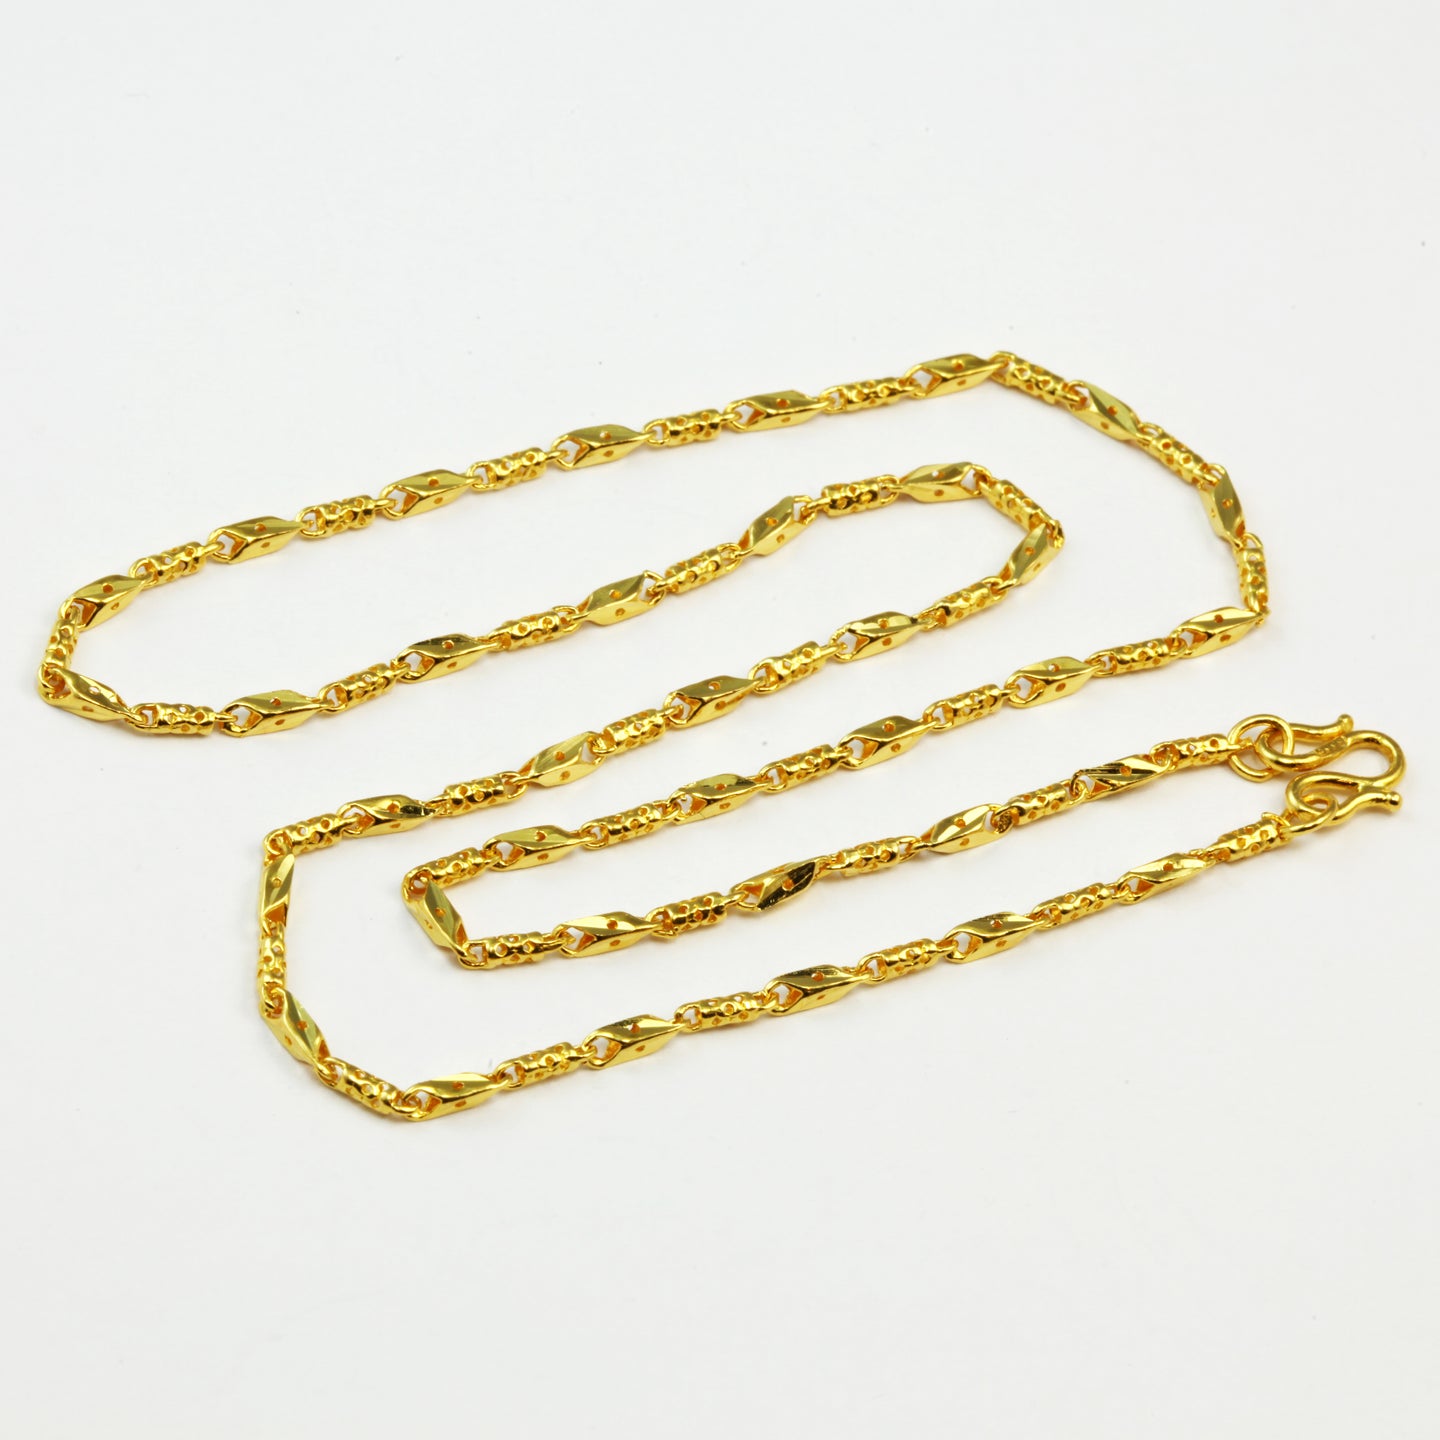 24K Solid Yellow Gold Design Link Chain Necklace 8.58 Grams 18